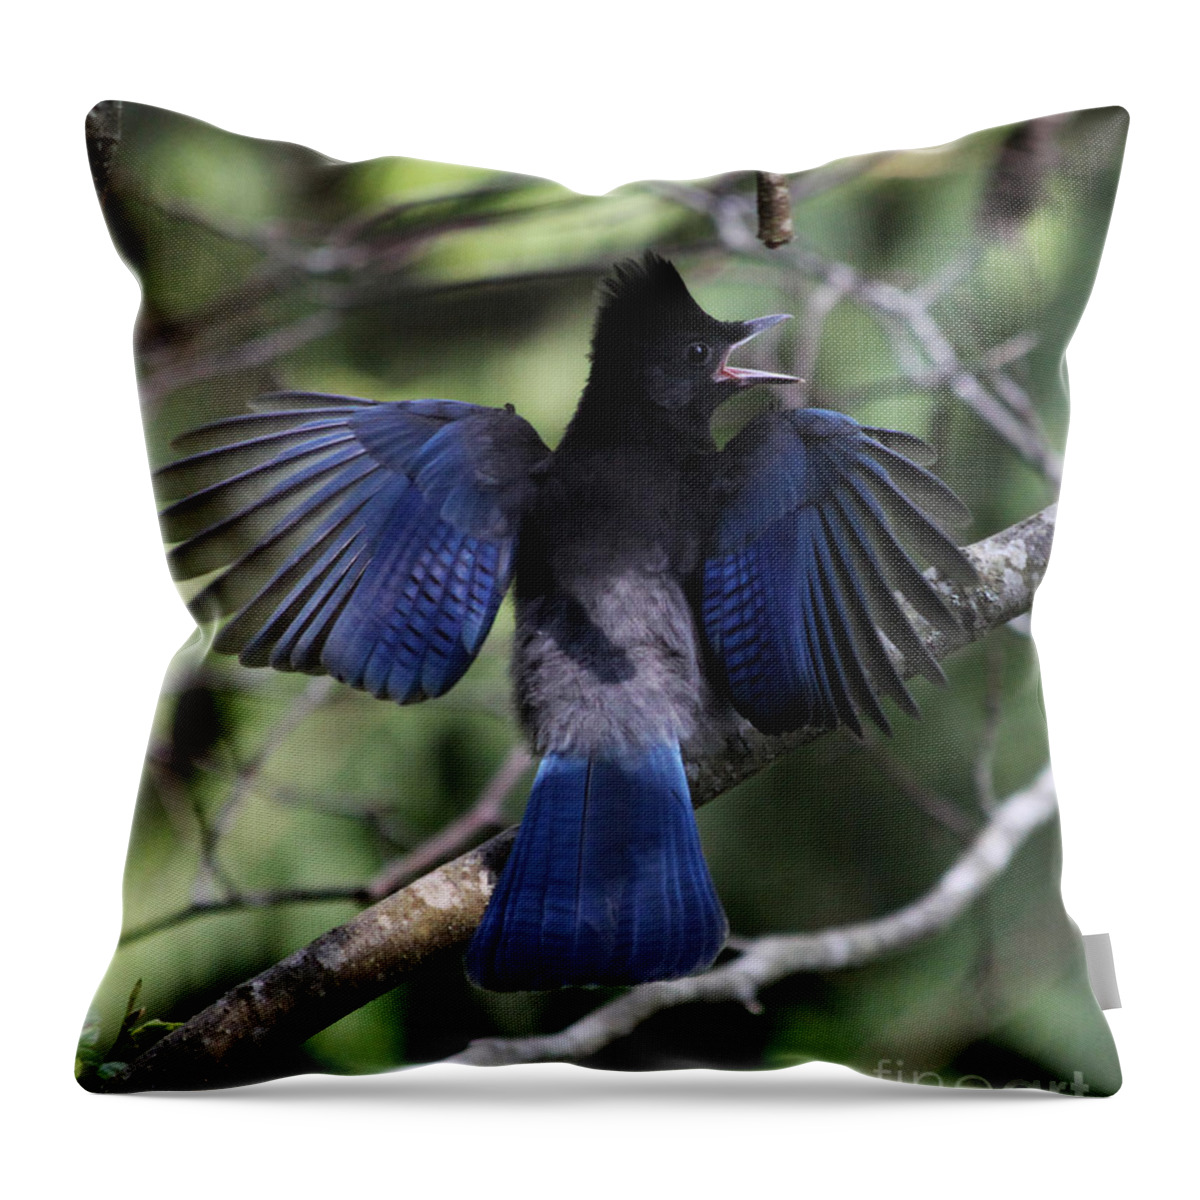 Bird Throw Pillow featuring the photograph Look At My Wings by Alyce Taylor